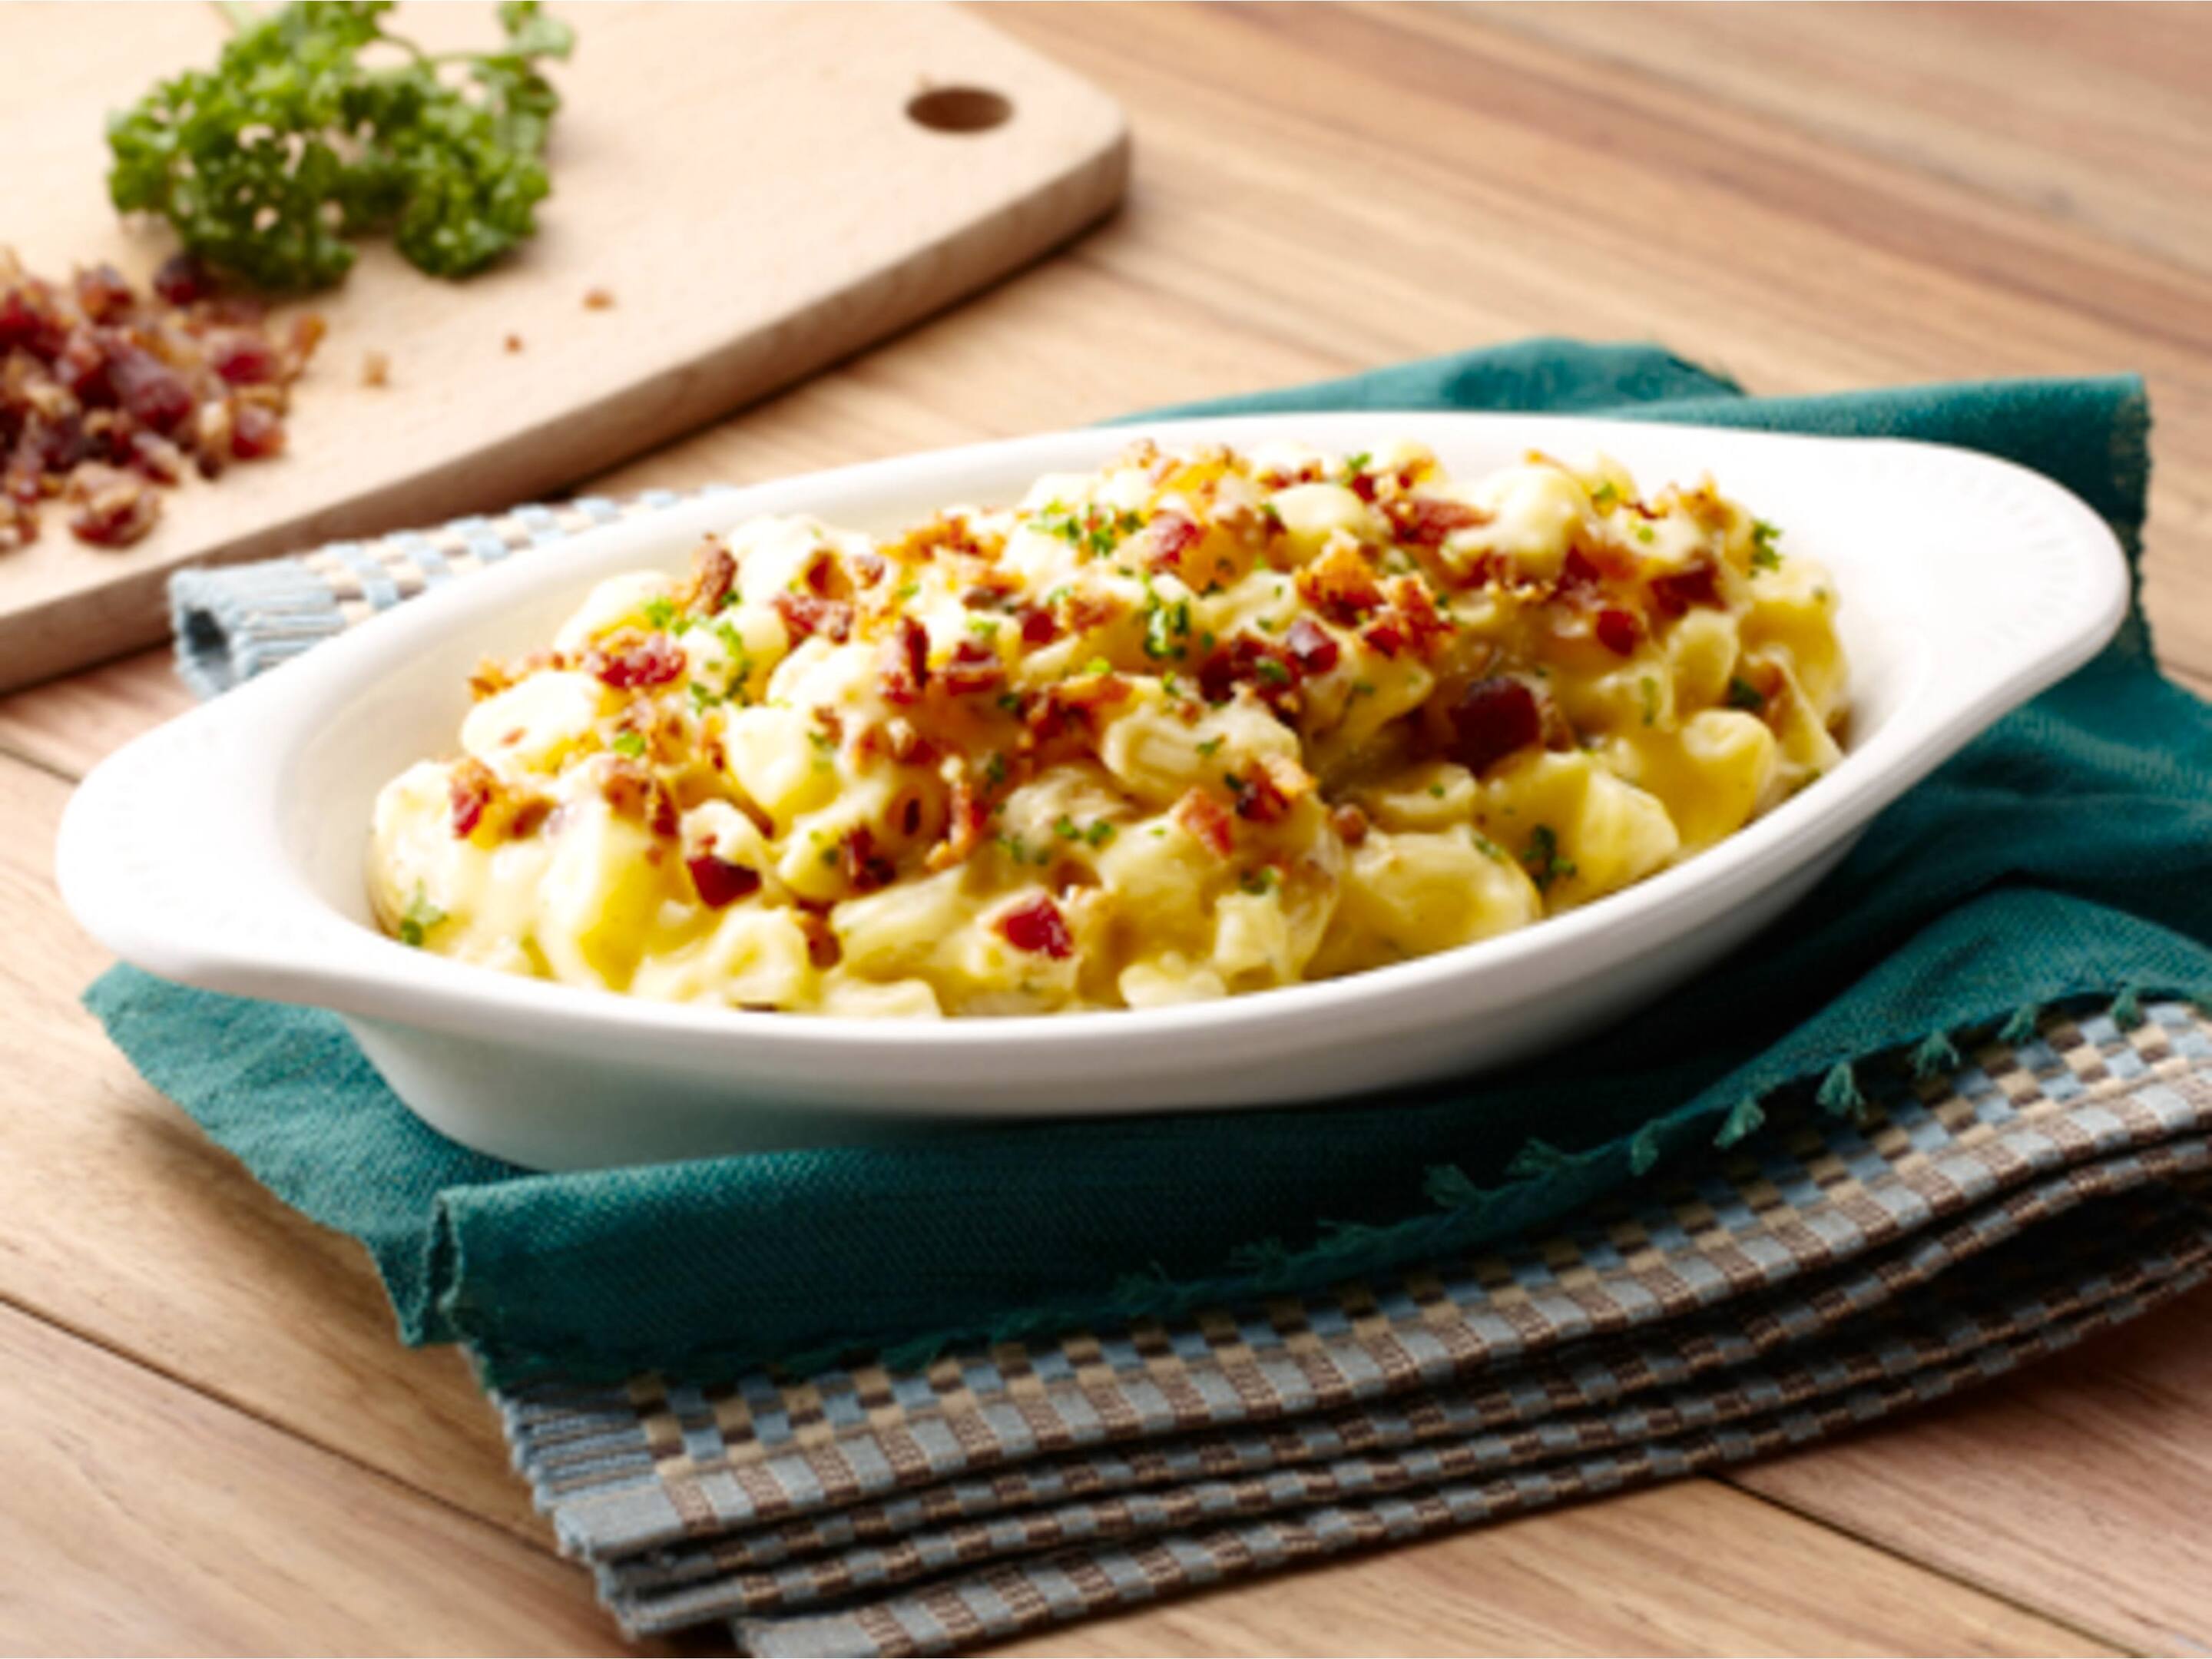 Mac and Cheese with bacon bits and parsley for garnish on a wooden table